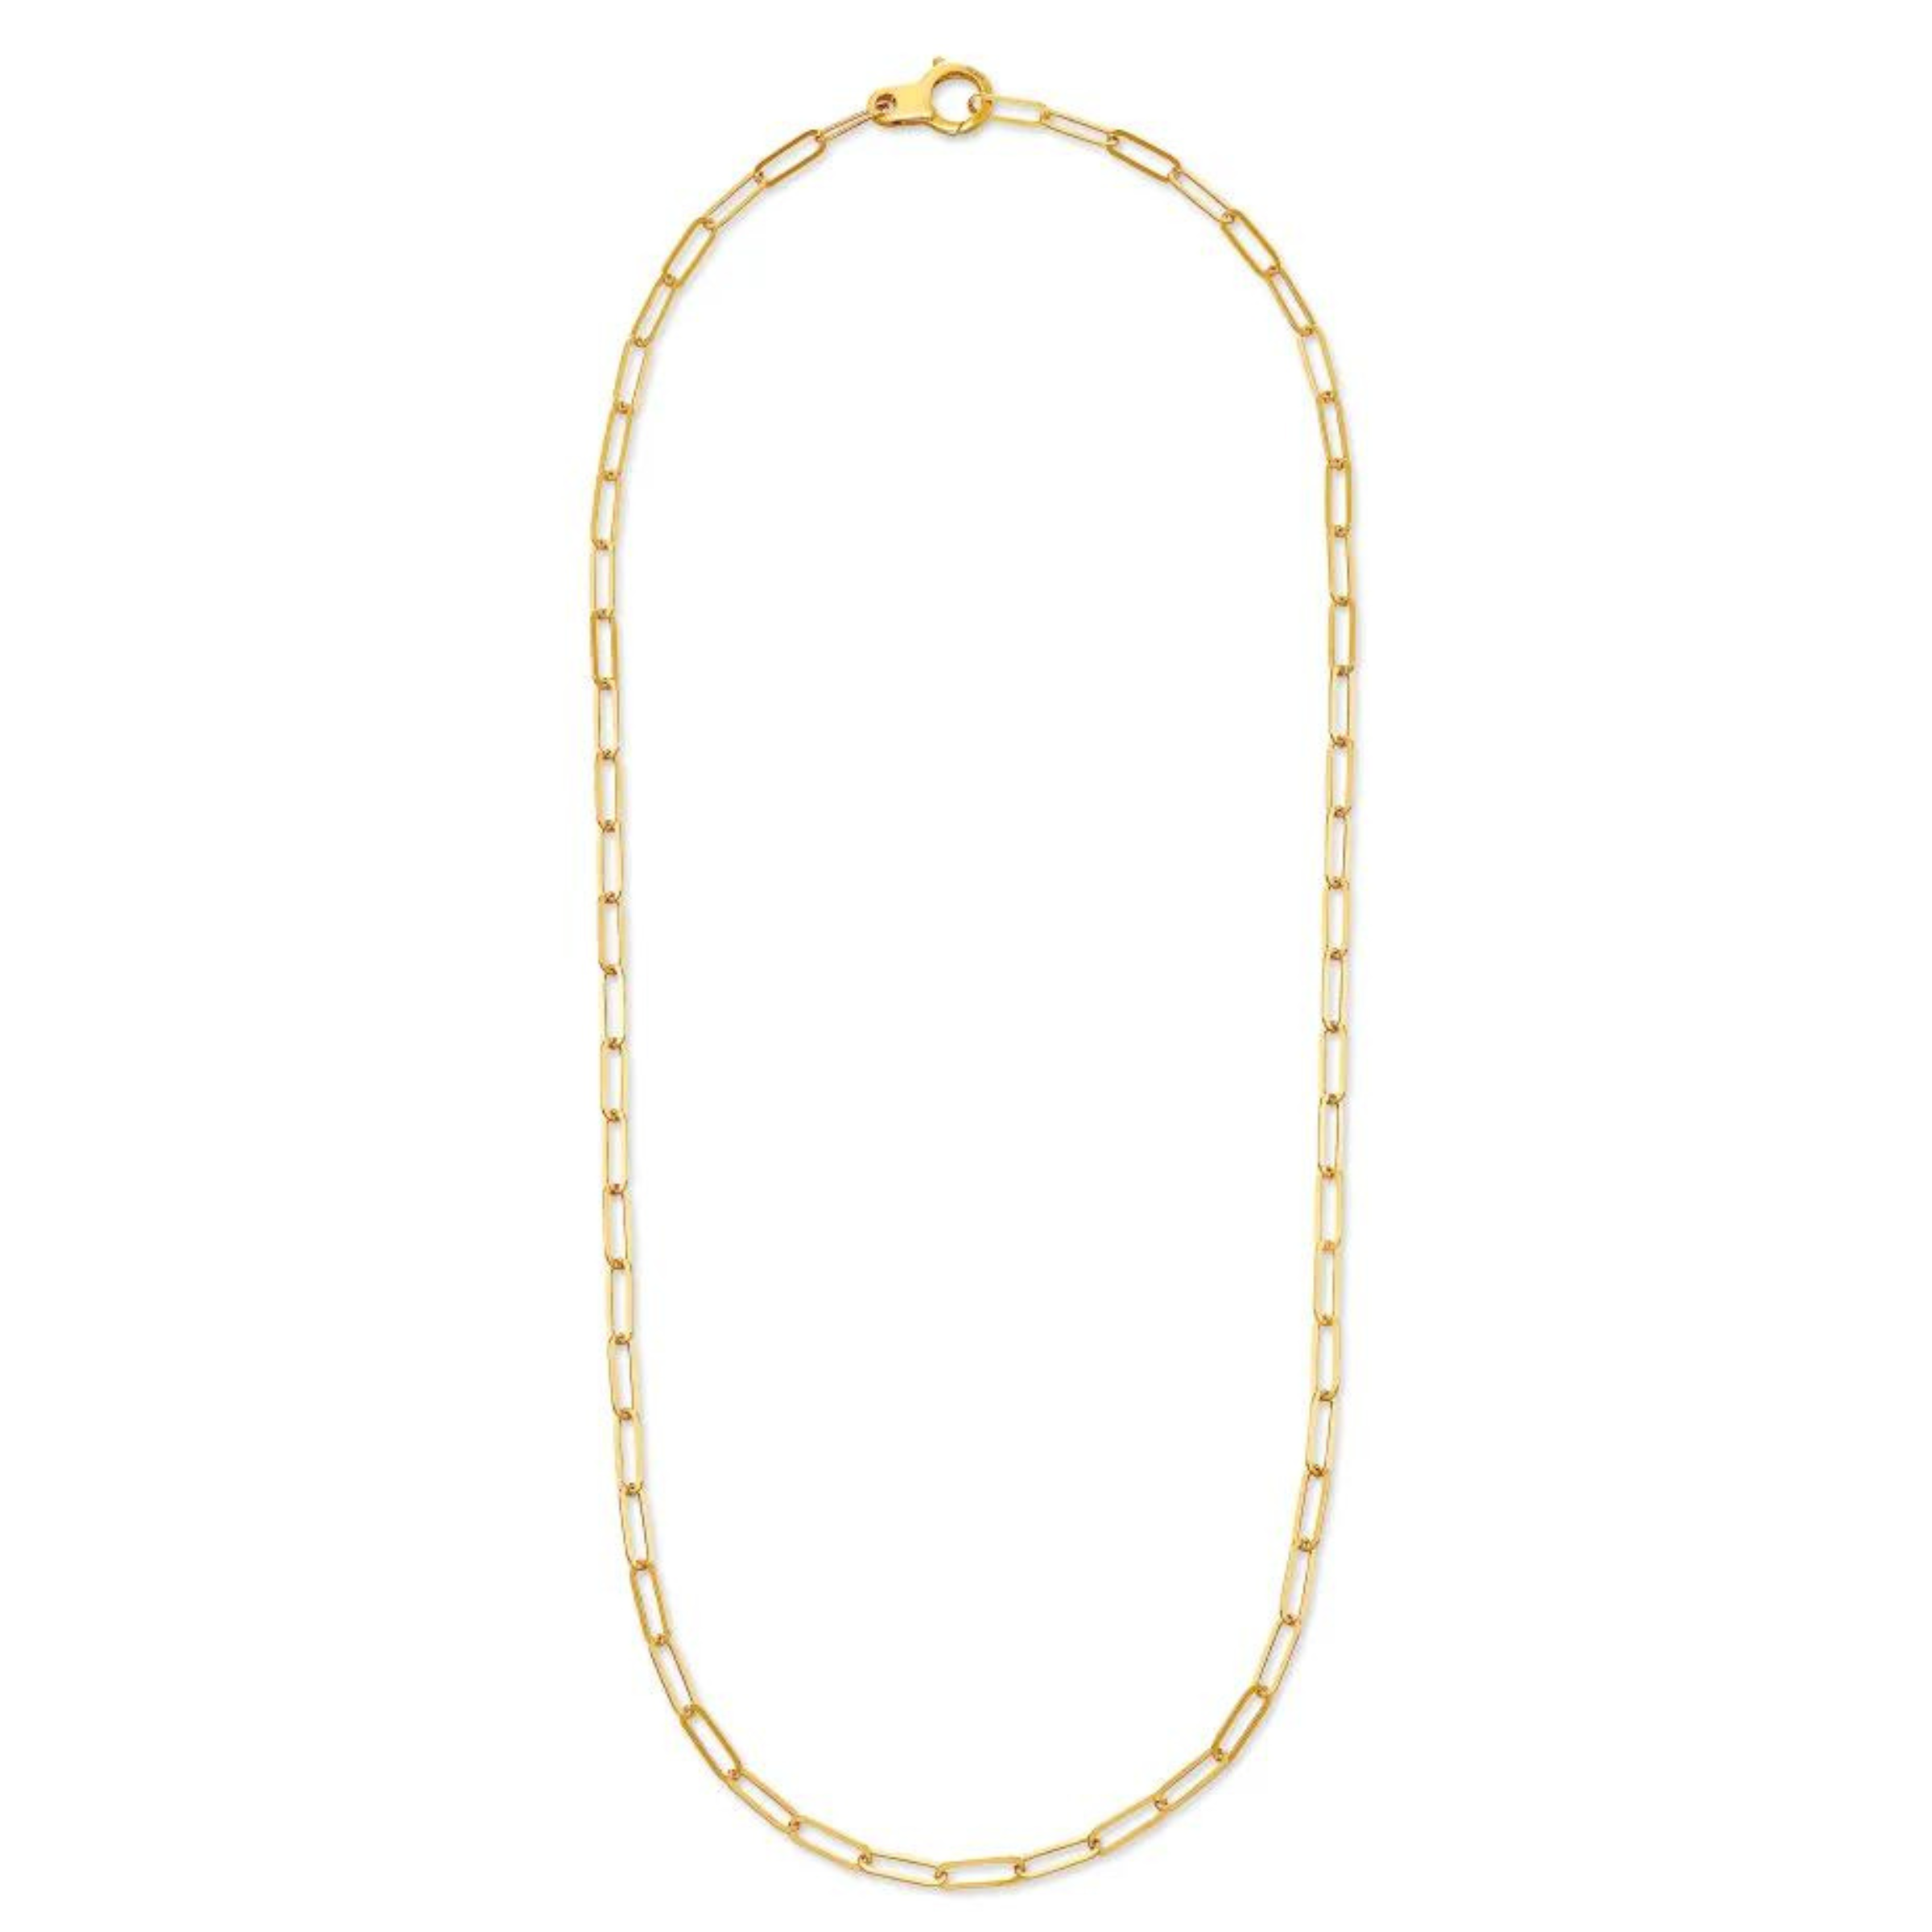 Kendra Scott | Large Paperclip Chain Necklace in 18k Gold Vermeil